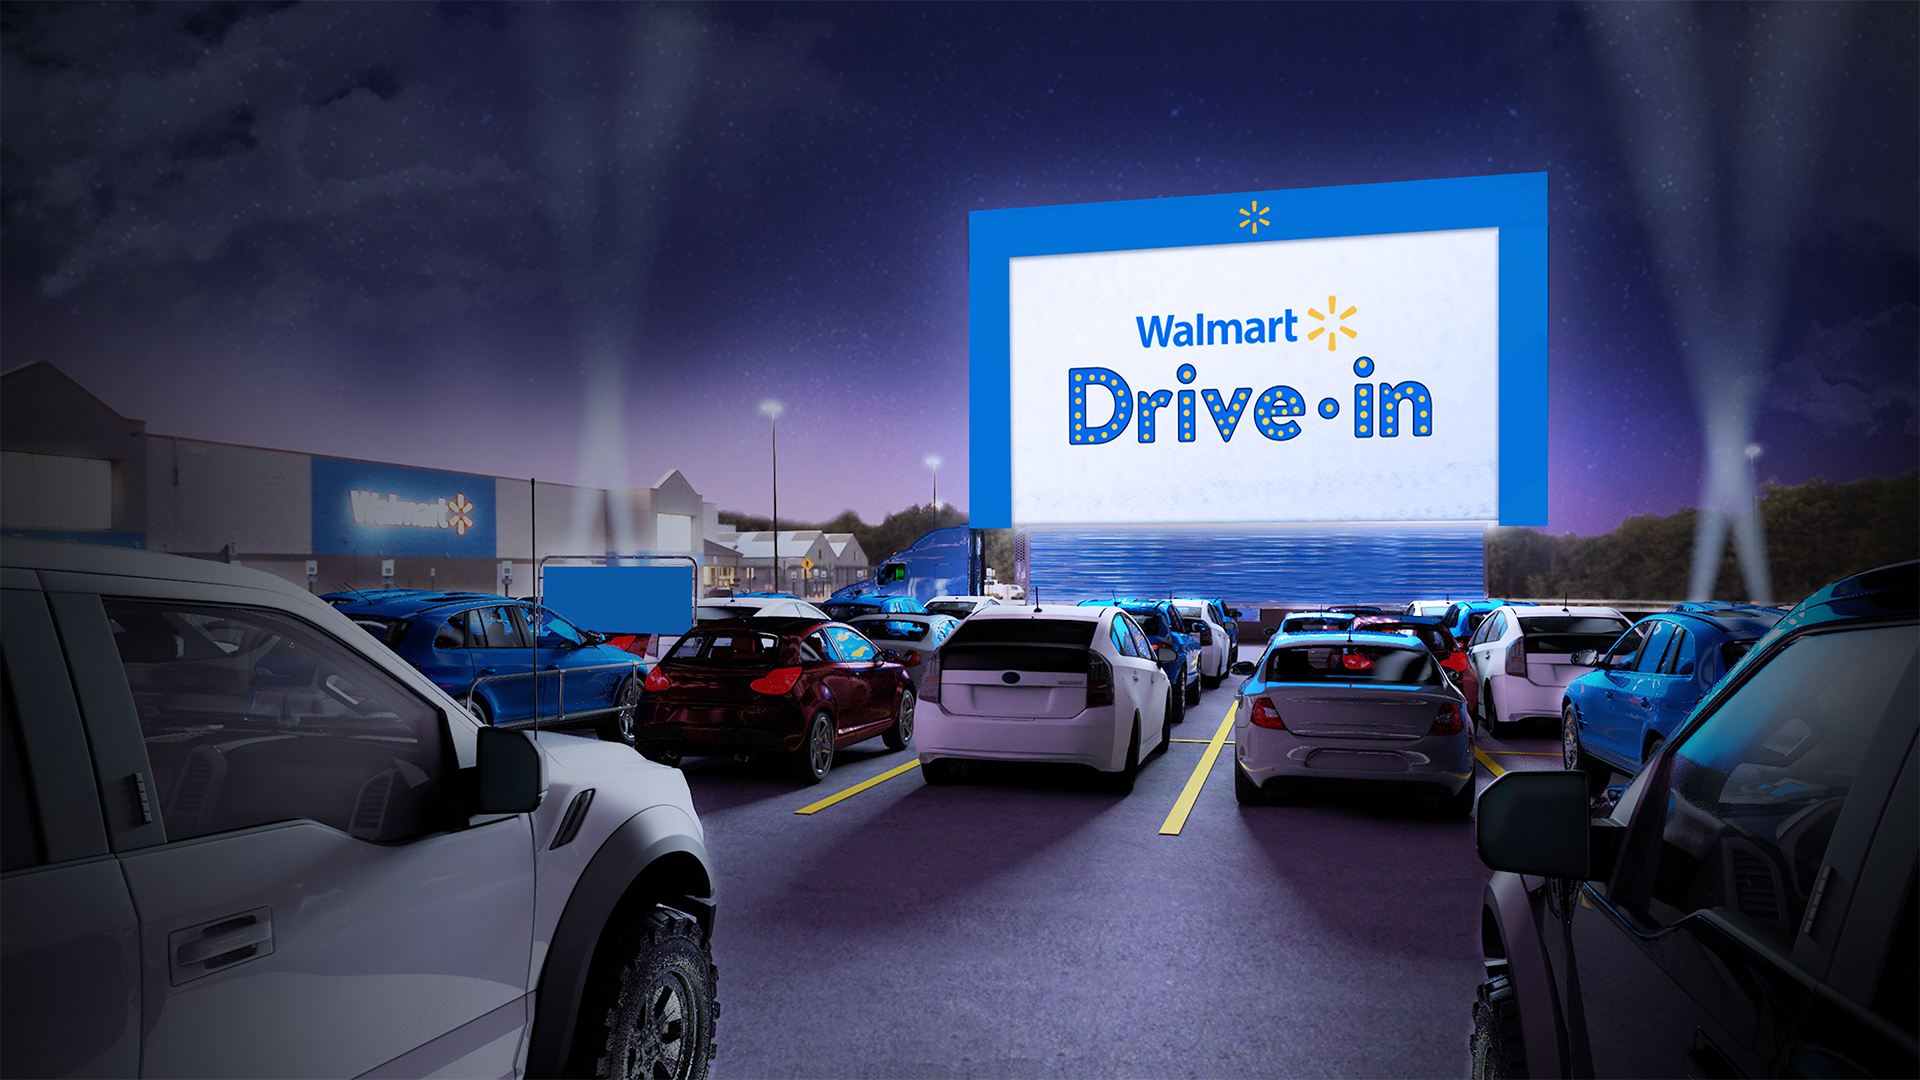 Walmart to Partner With Tribeca Enterprises to Transform Parking Lots to Drive-In Movie Theaters